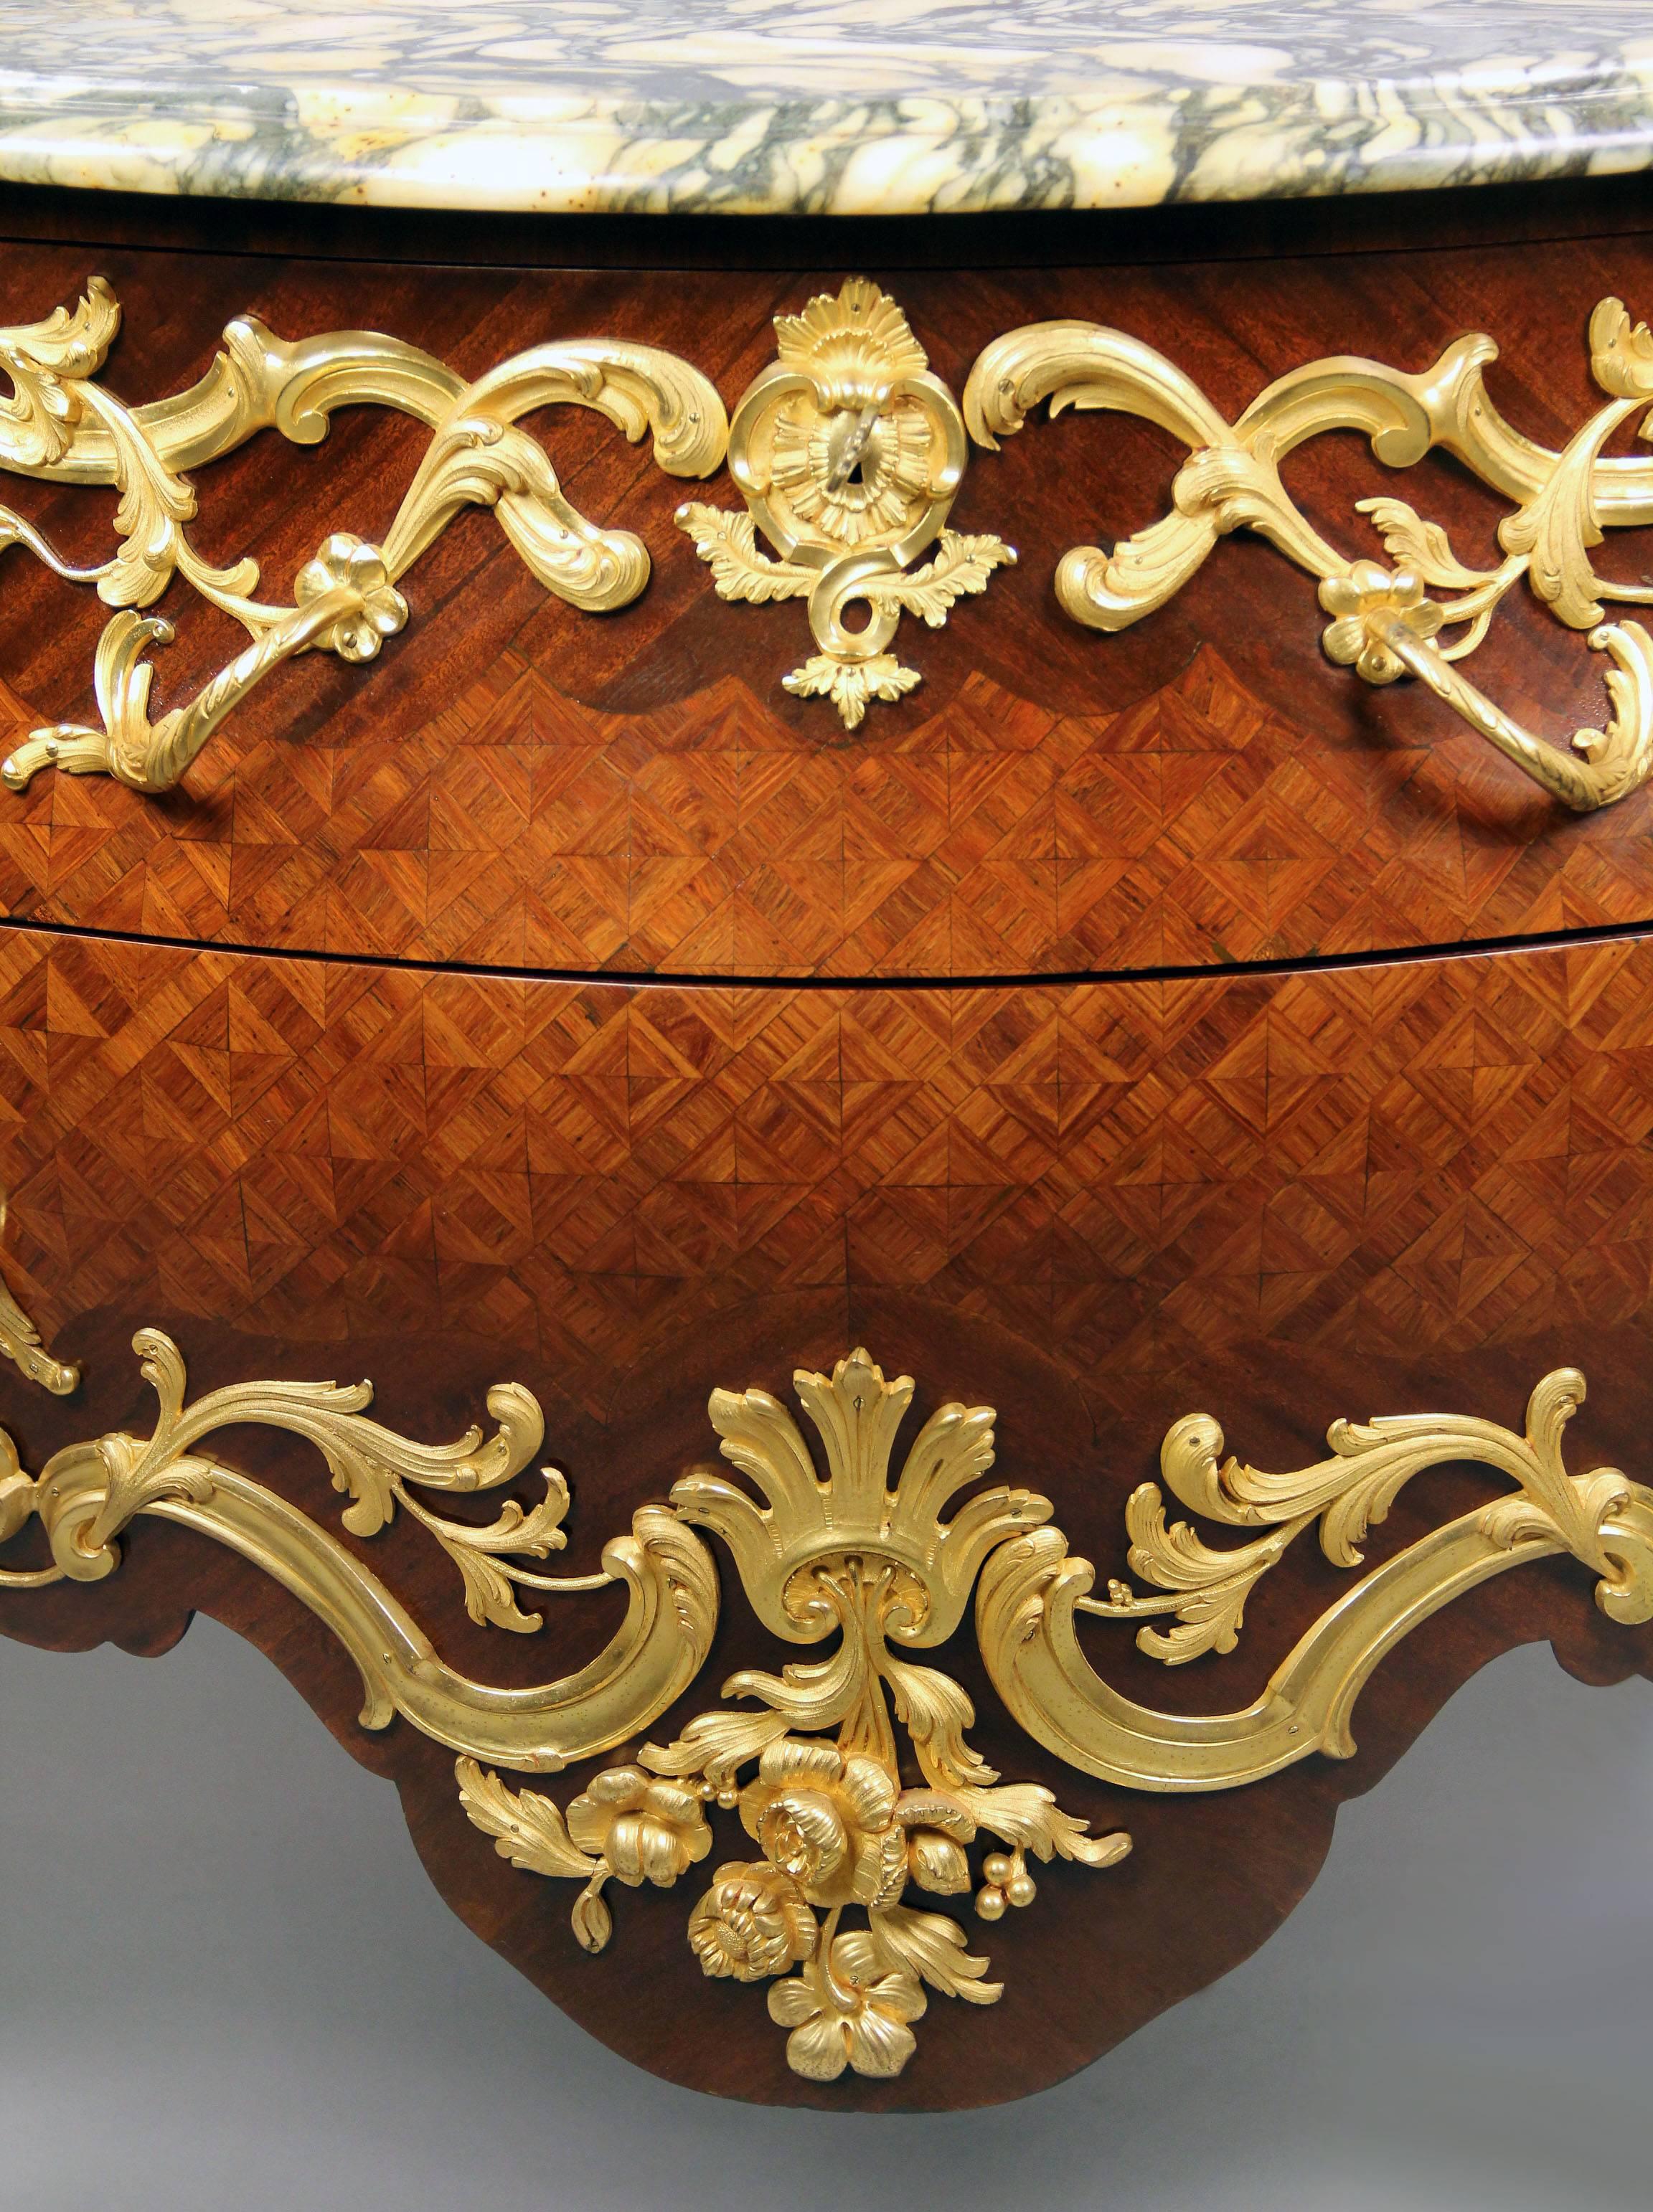 Belle Époque Lovely Late 19th Century Gilt Bronze-Mounted and Parquetry Inlaid Commode